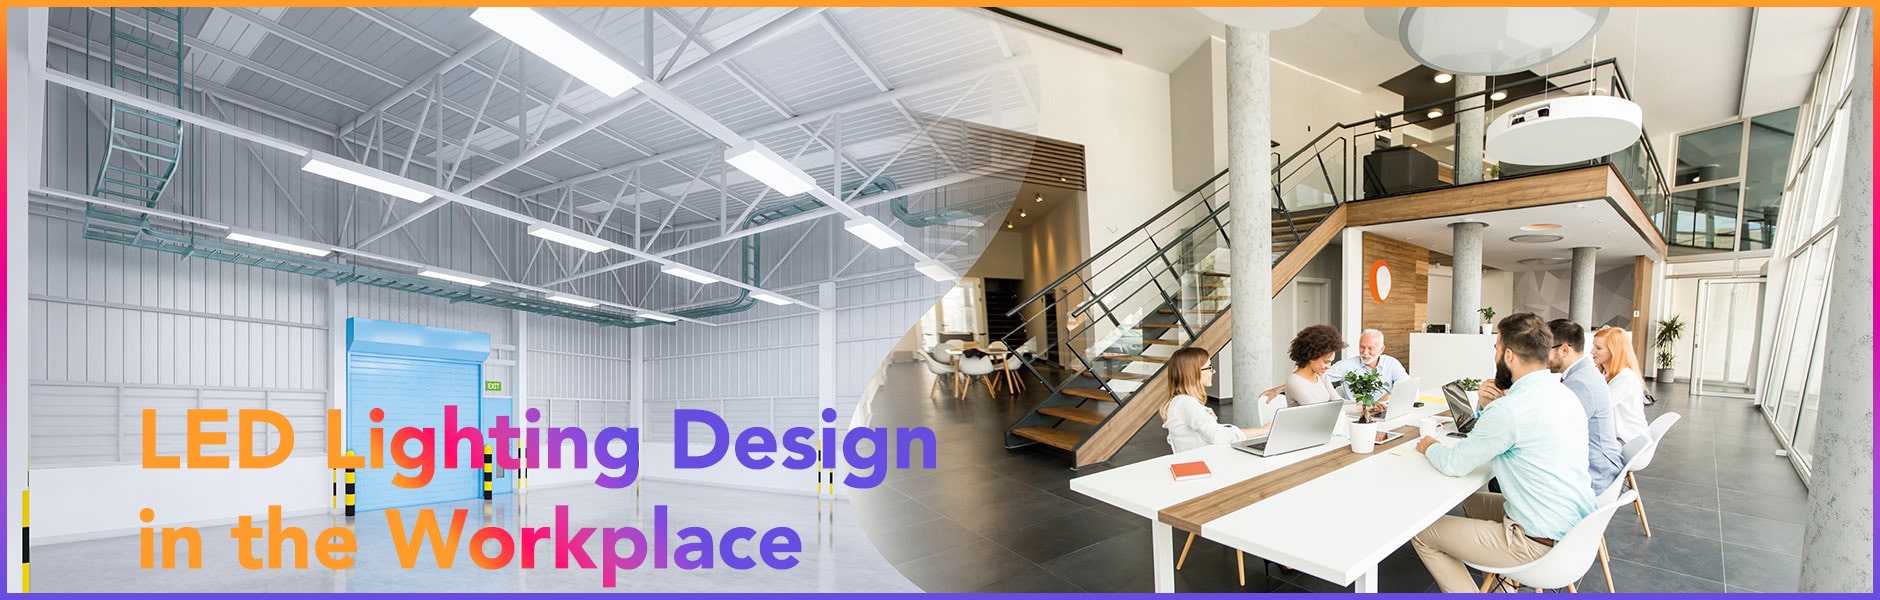 LED lighting design in the workplace